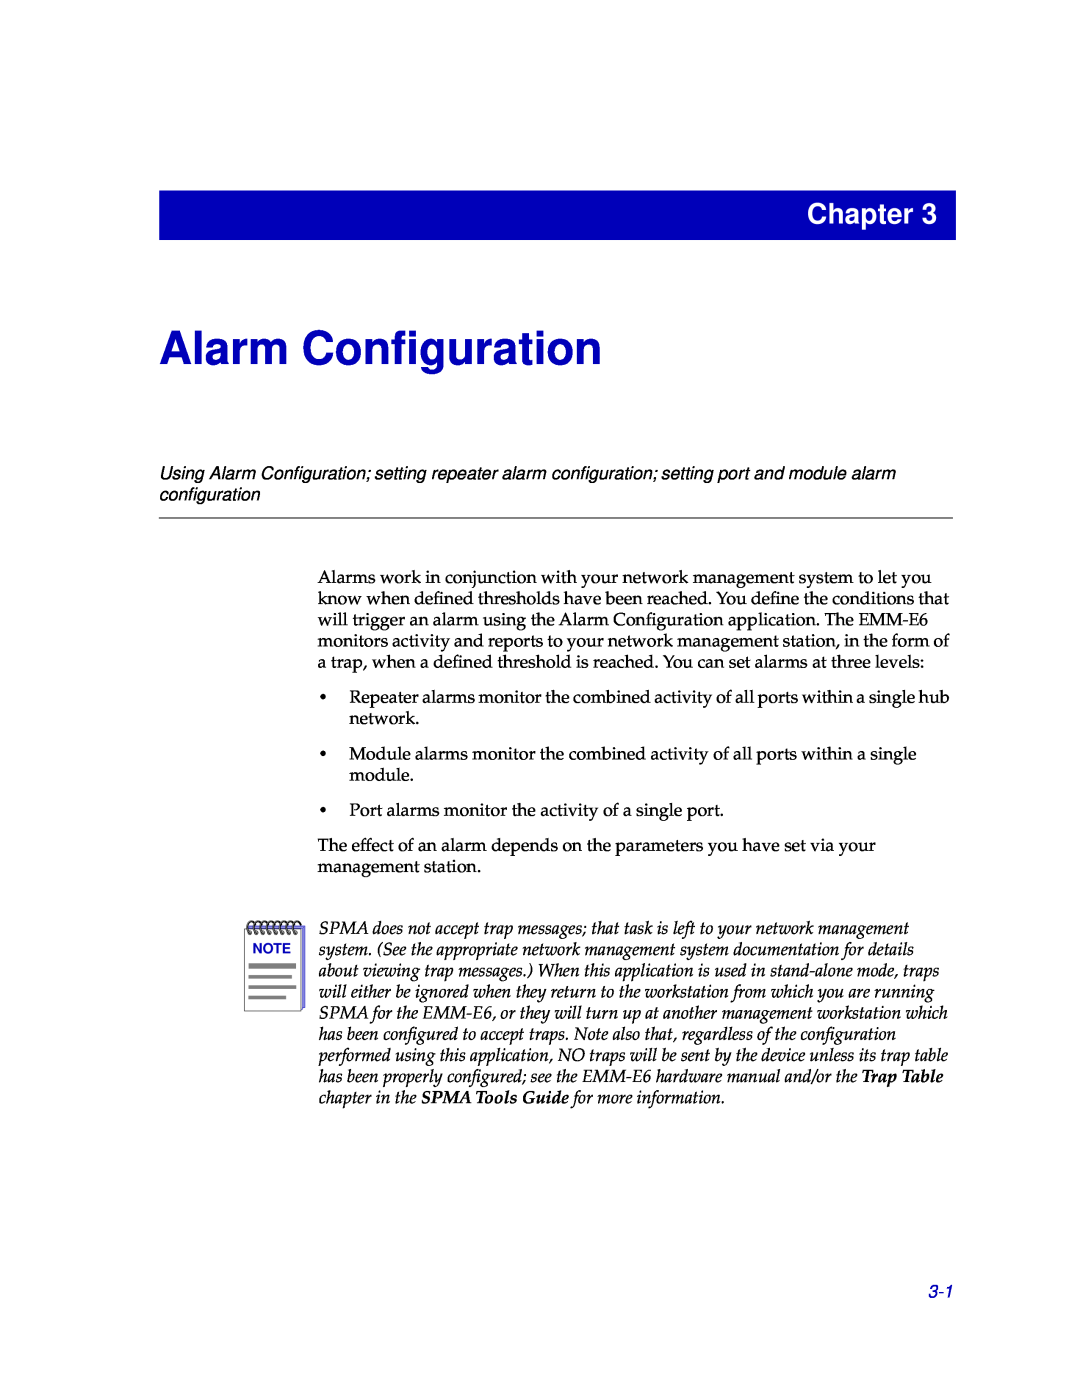 Cabletron Systems EMM-E6 manual Alarm Conﬁguration, Chapter 